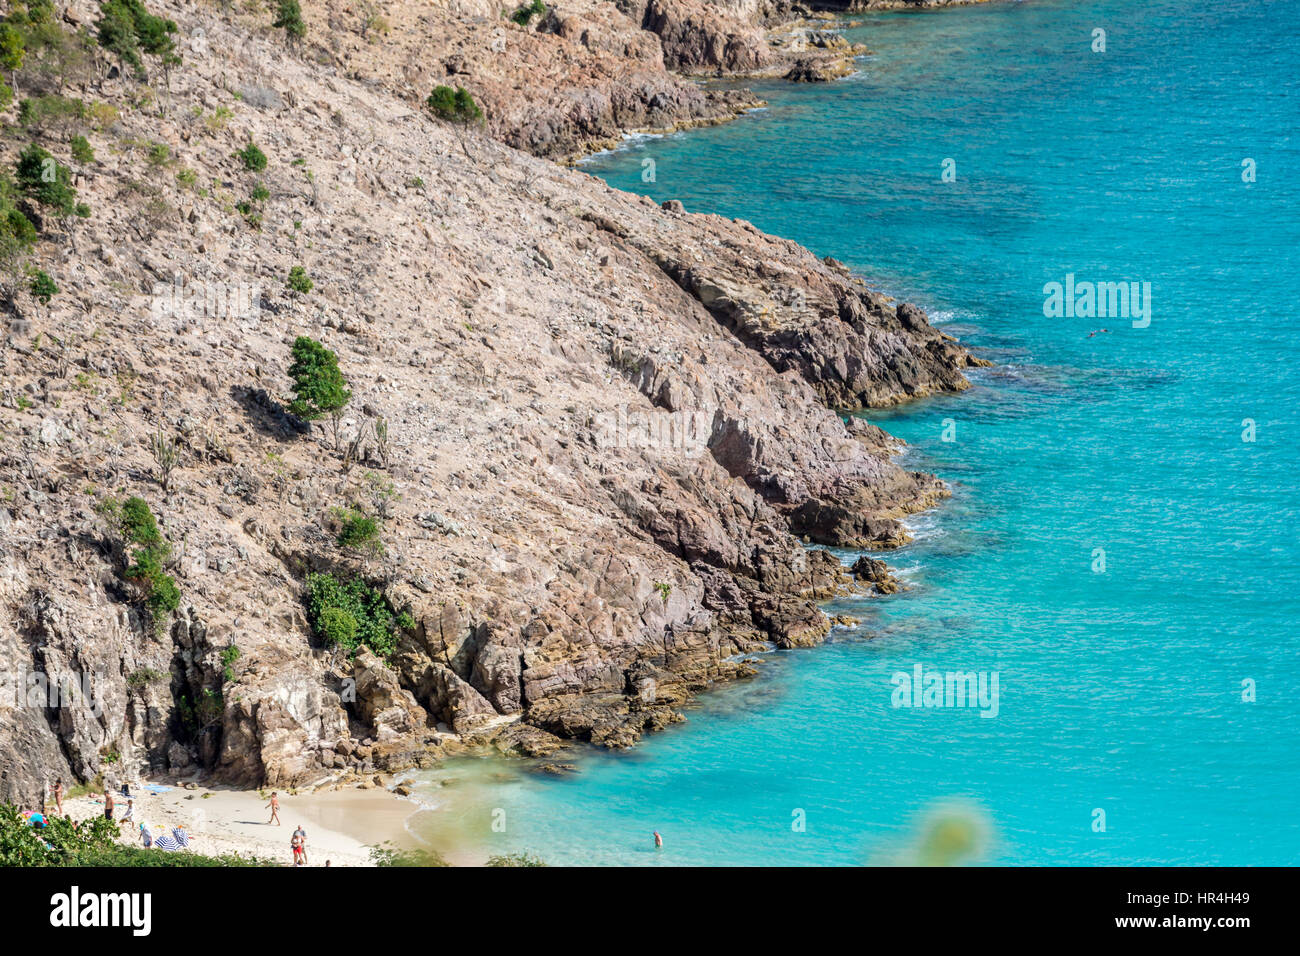 Beach and rock formations in St Bart's Stock Photo